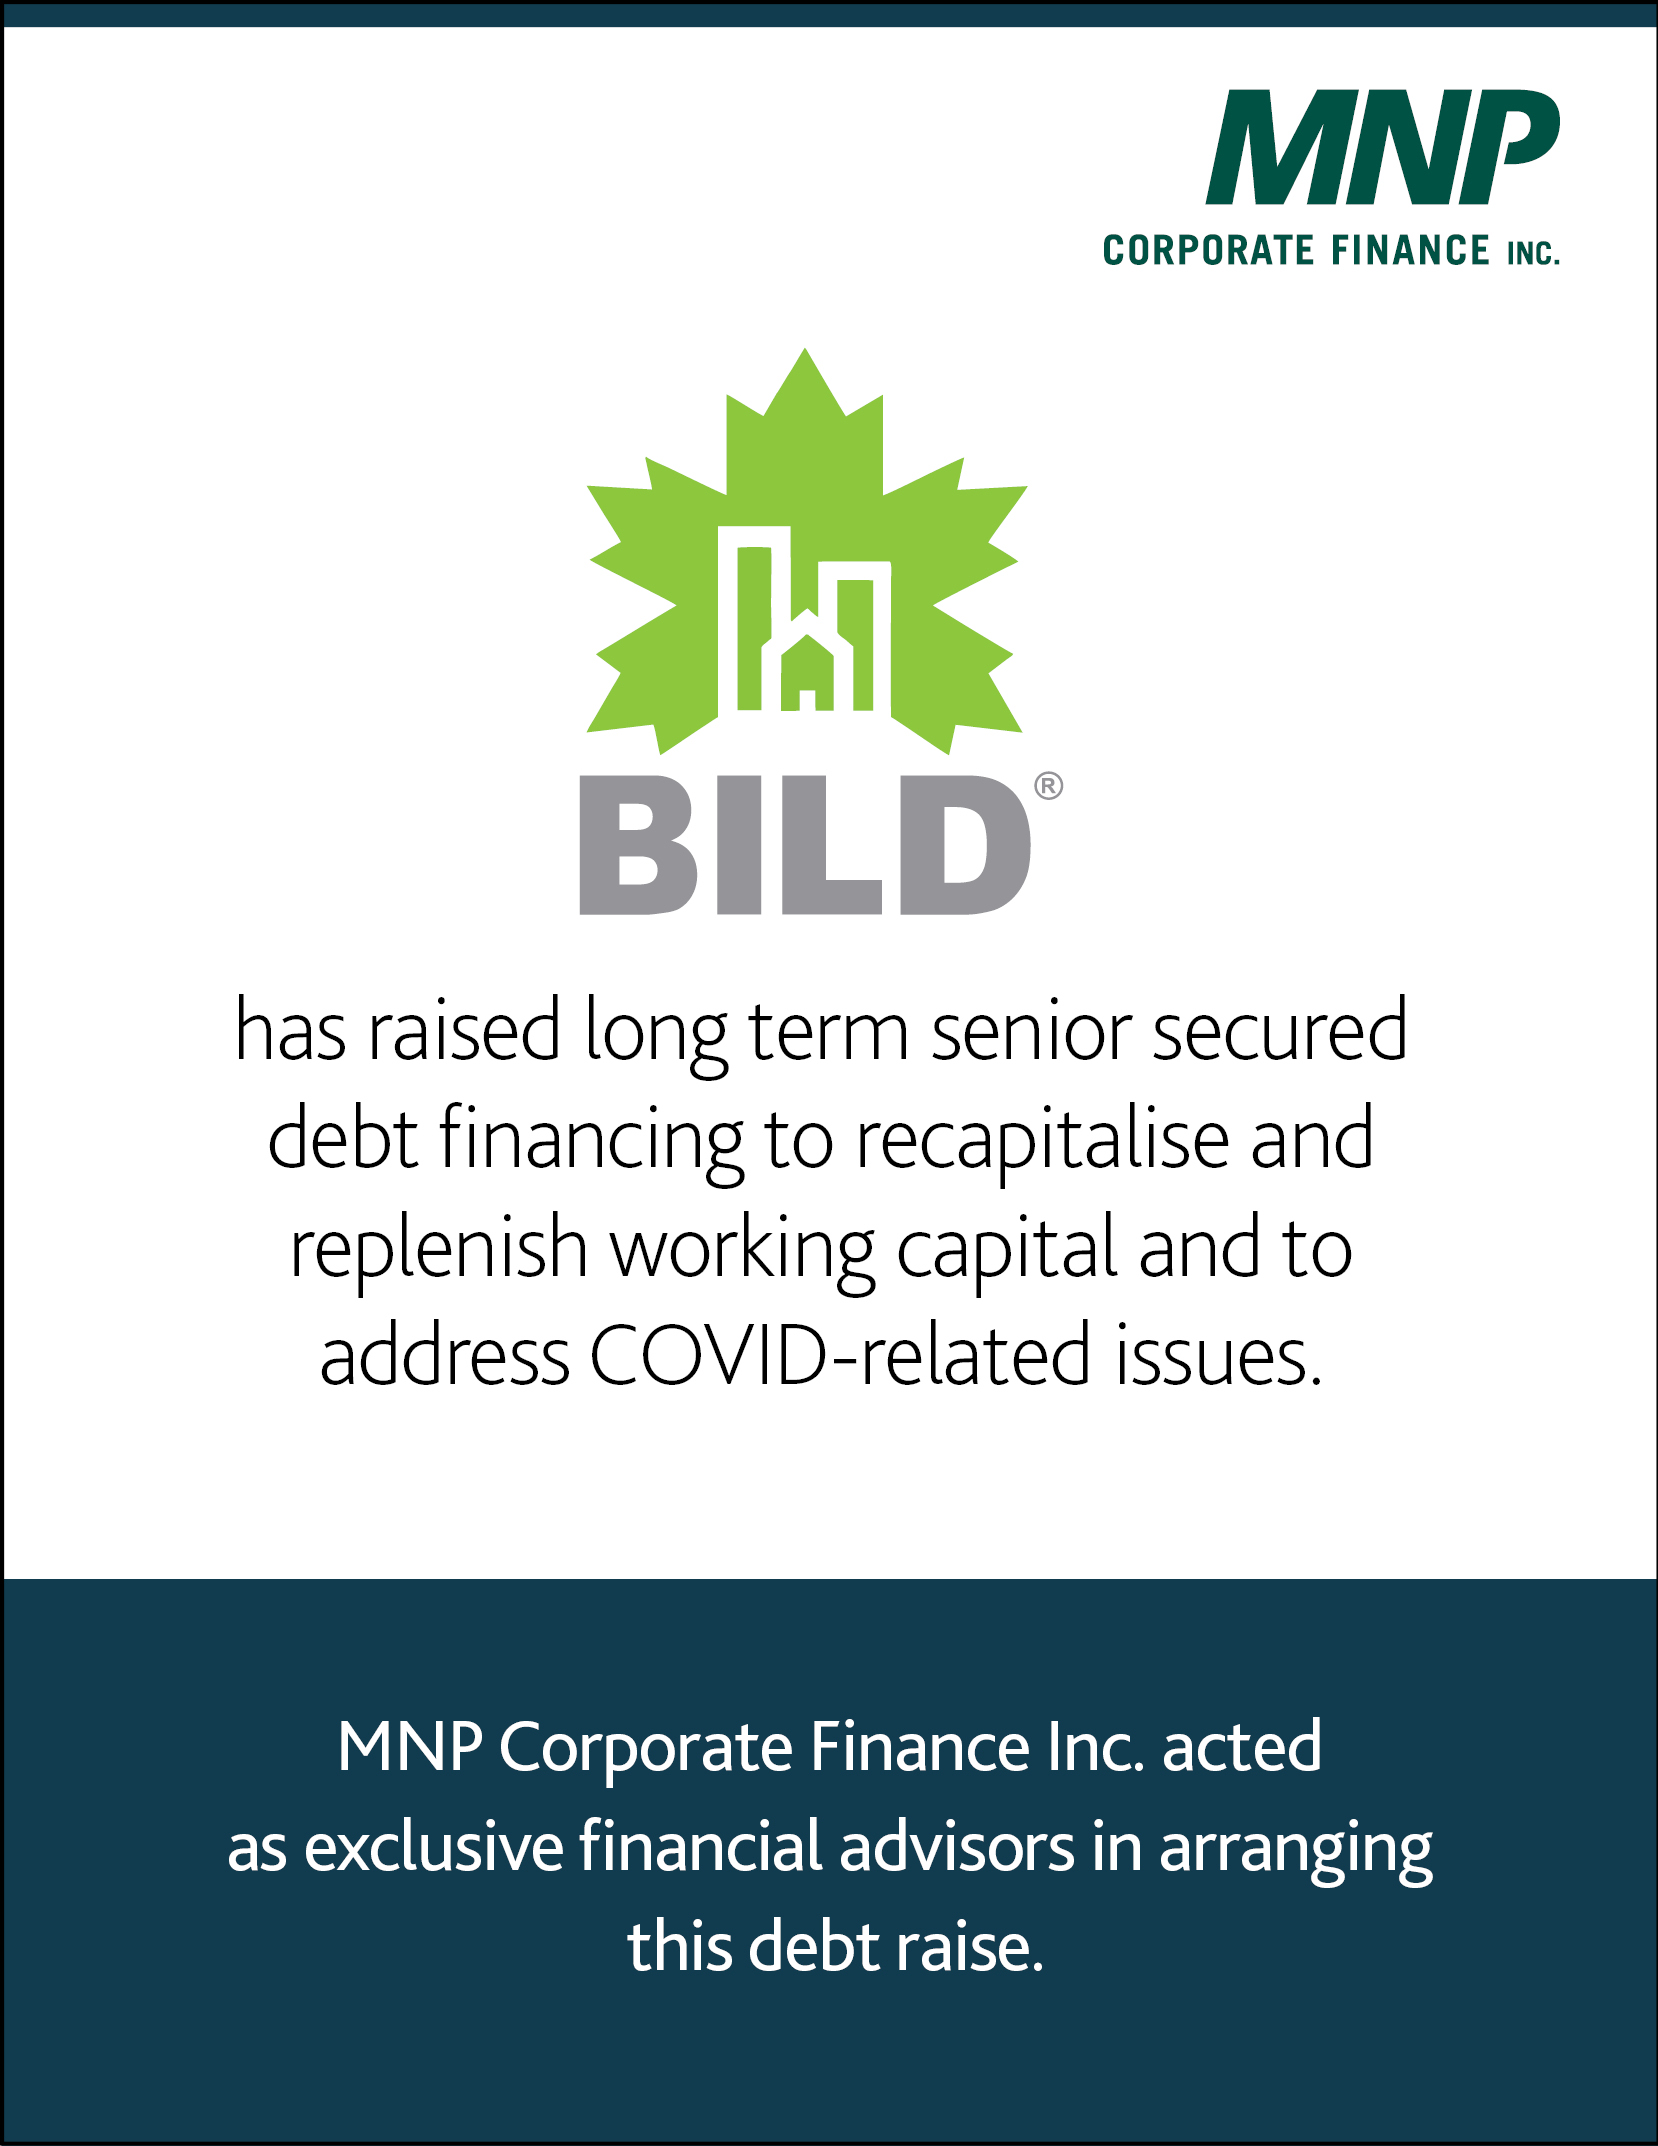 BILD has raised long term senior secured debt financing to recapitalise and replenish working capital and to address COVID-related issues 